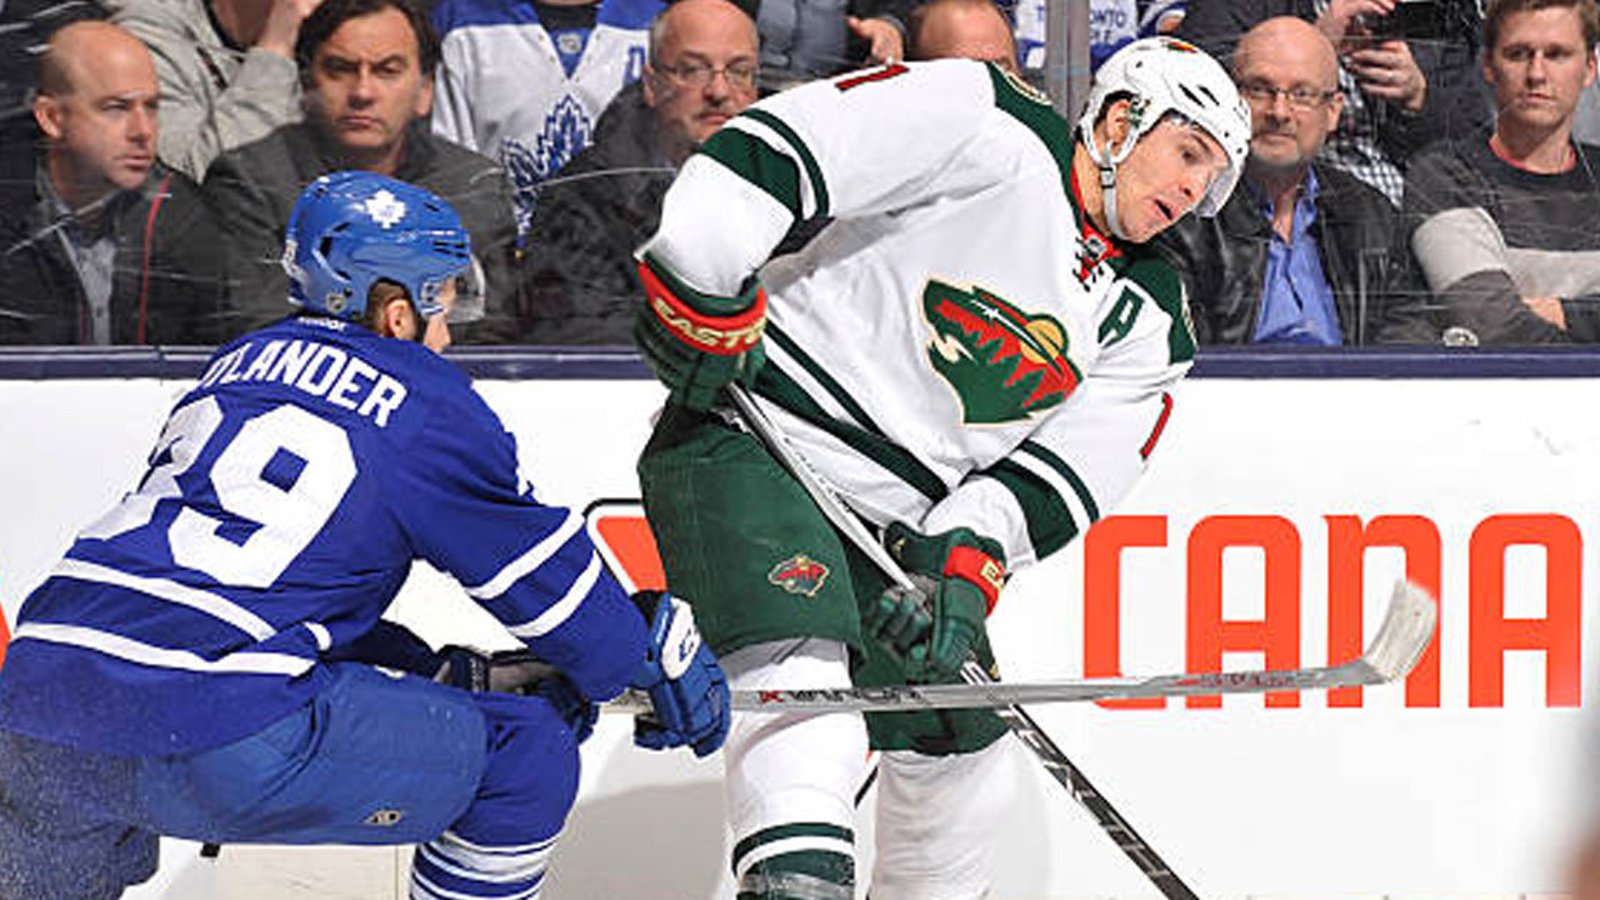 Wild plans perfect pitch for Leafs’ Nylander